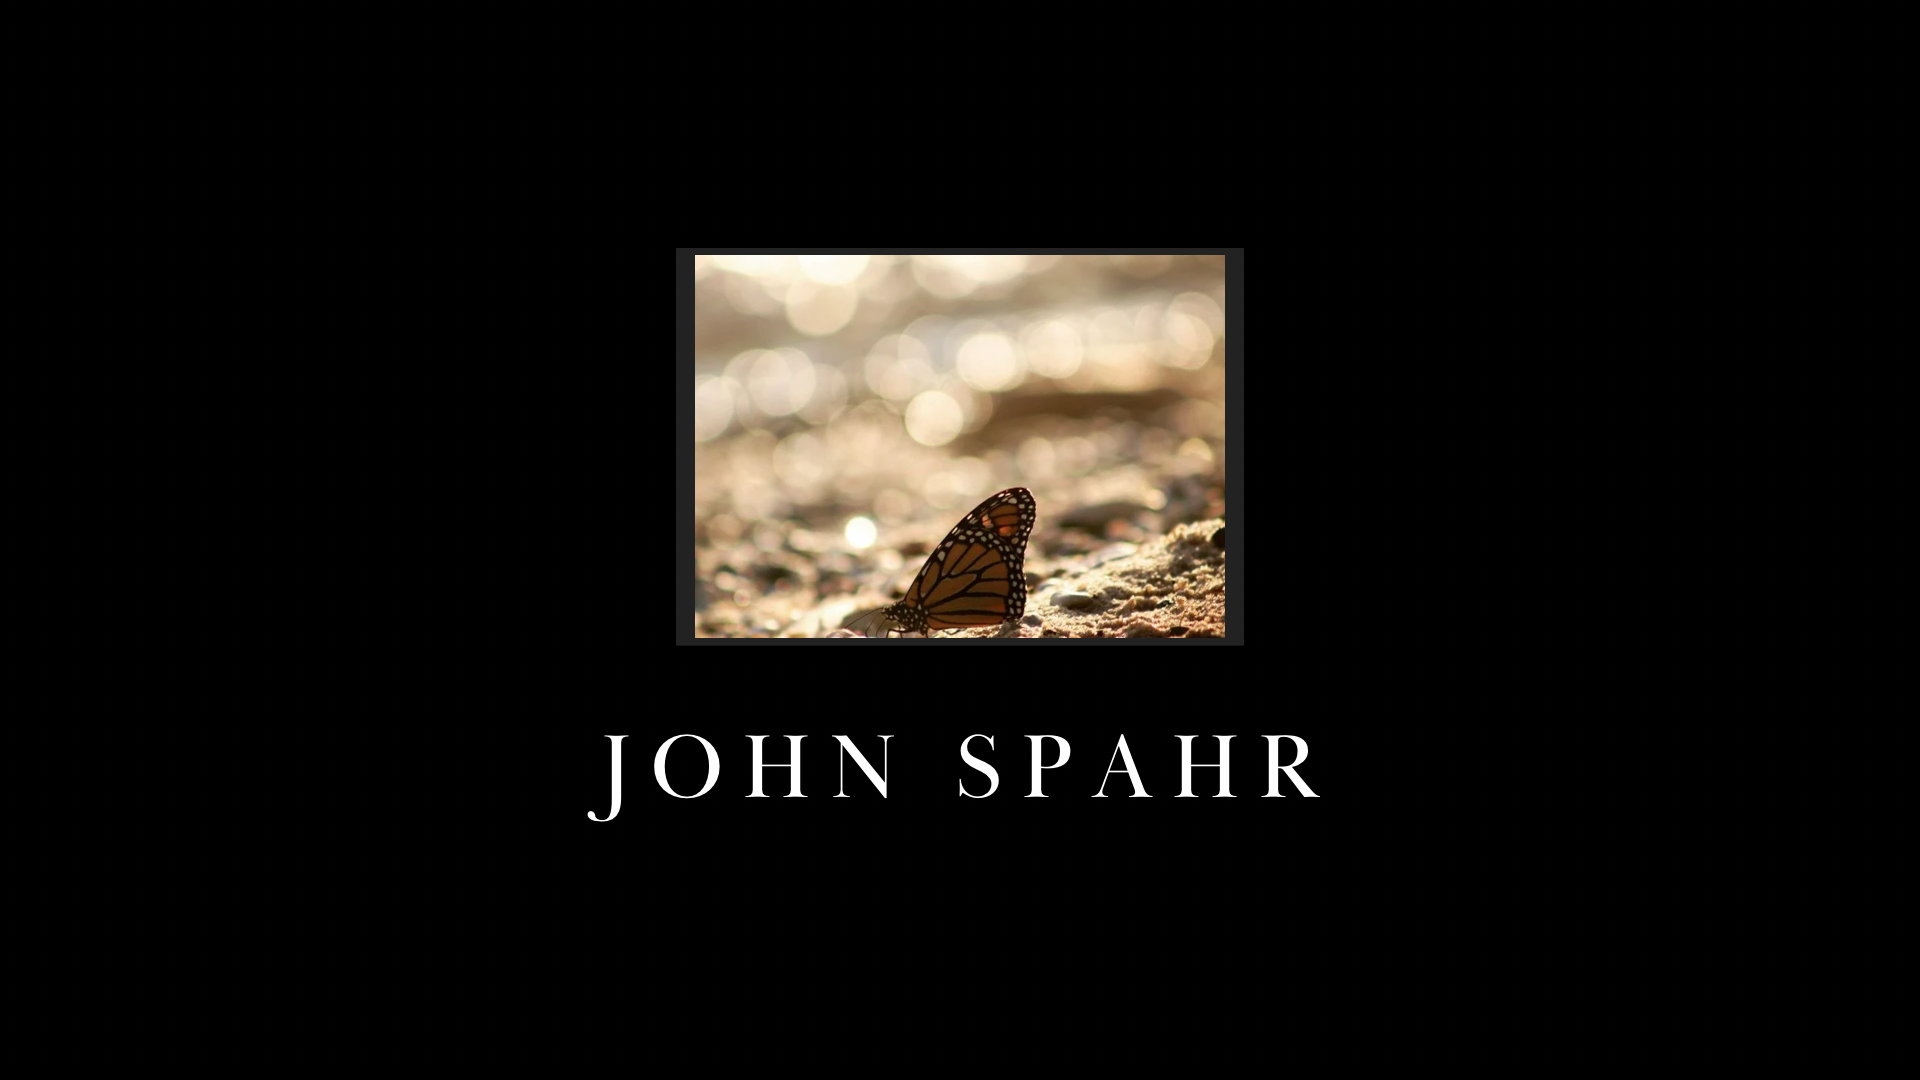 John Spahr - Thoughts, Projects, Tech, Watches, and Photography